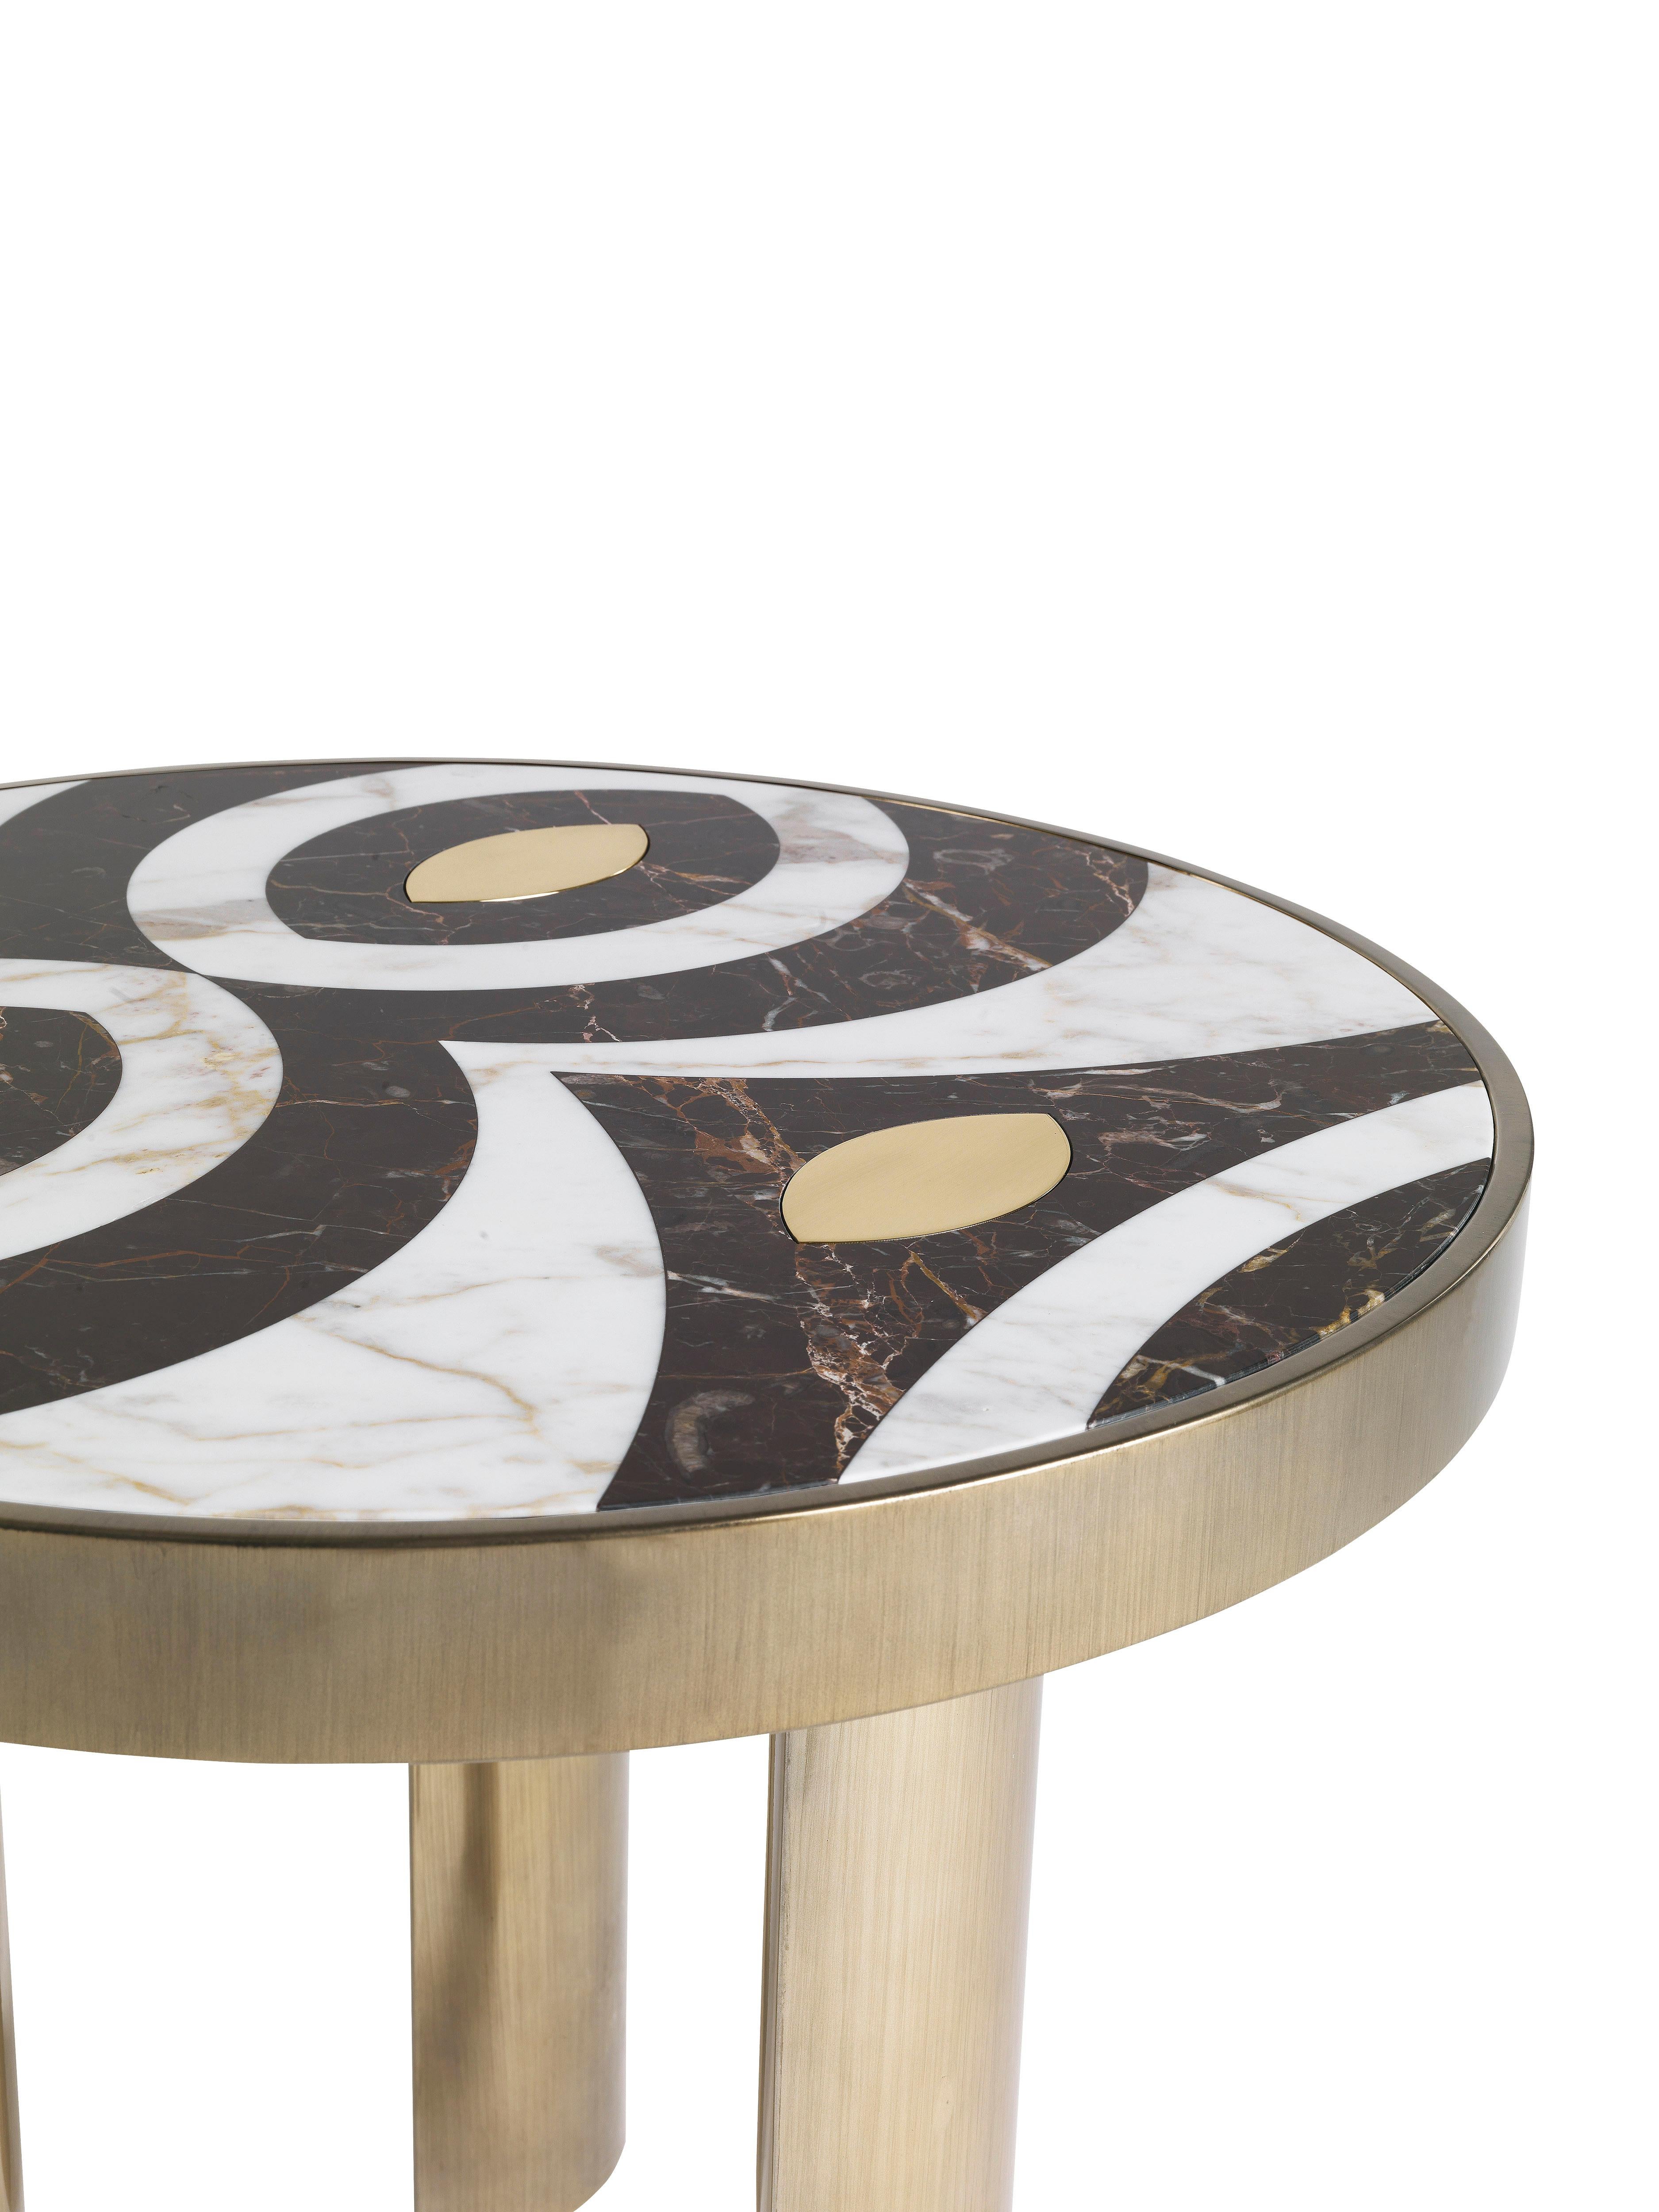 Undisputed protagonist of the Afro theme from which part of the new collection takes inspiration, the Akan coffee table shows on the top a typical decoration of the African masks, reproduced in marble and ivory, with gold details. According to the